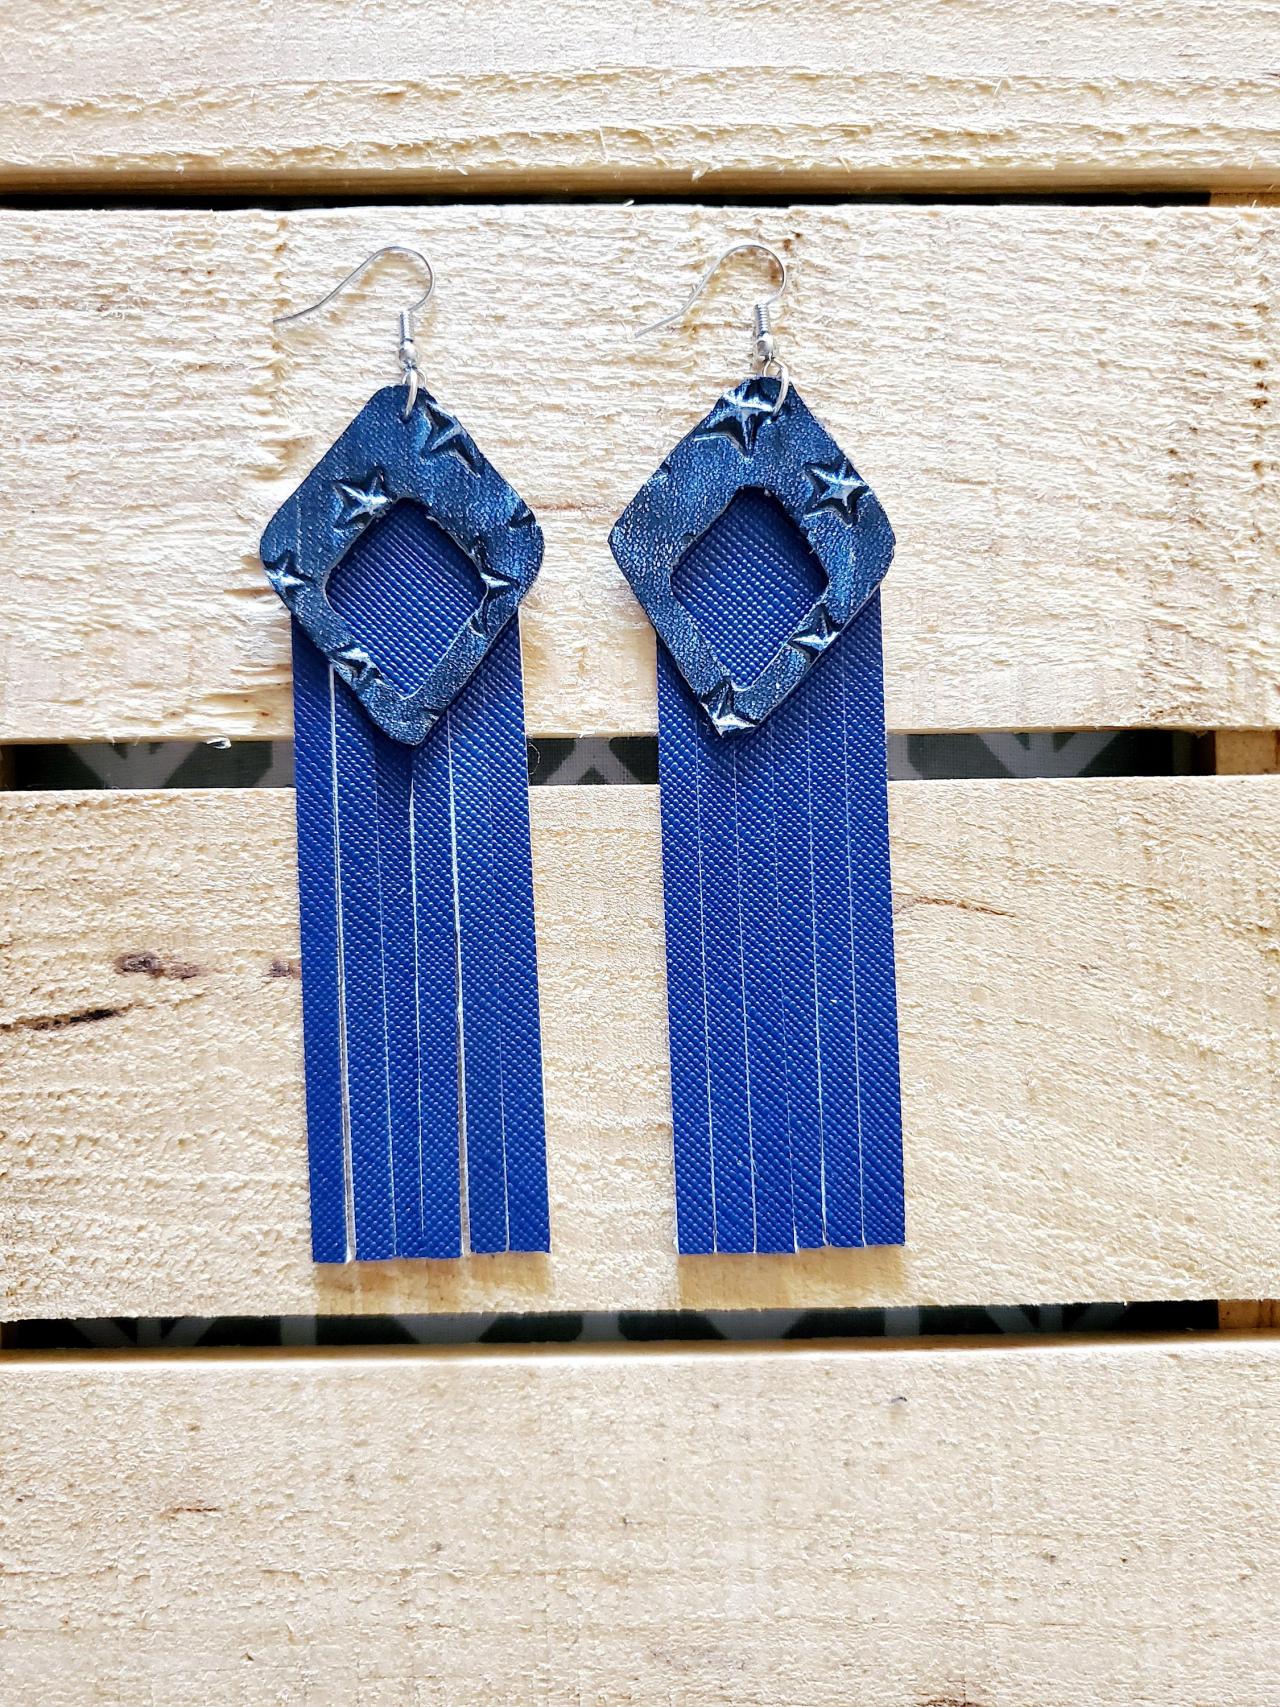 Blue Leather Fringe Earrings, Distressed Leather Diamond, Boho Rustic Earrings, Star Leather Metallic, Womans Gift, Statement Earrings, Chic